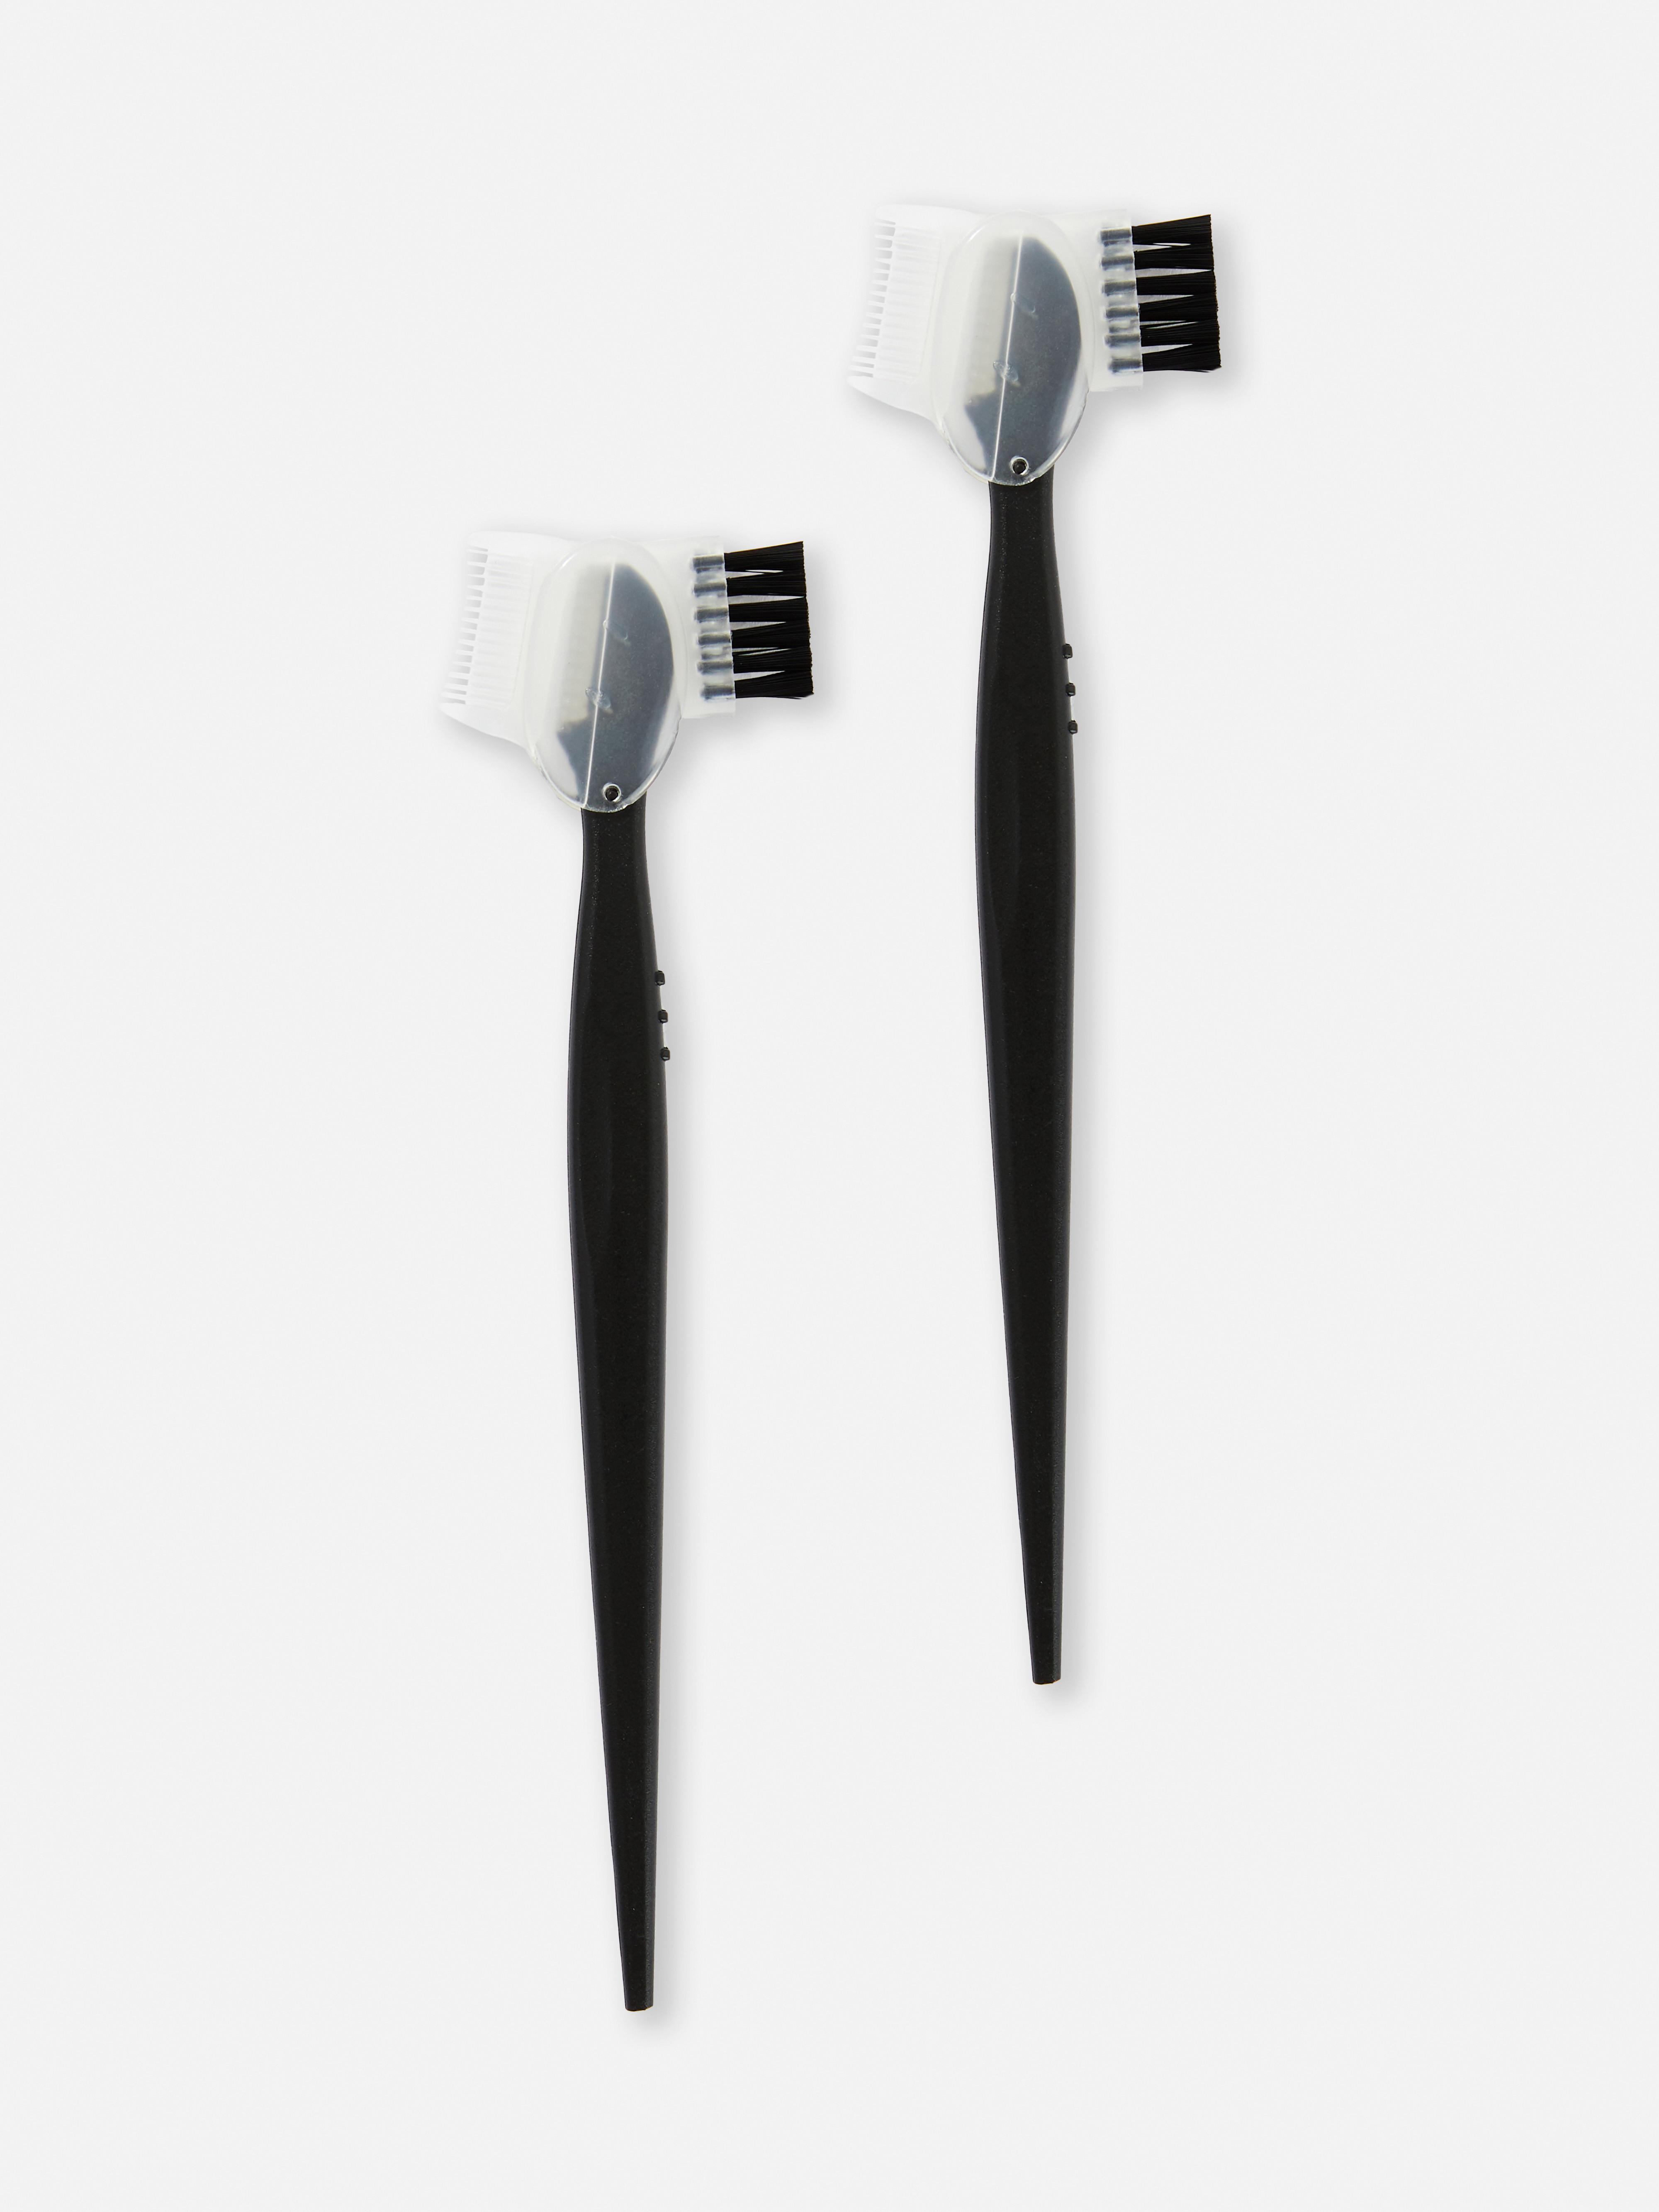 PS Eyebrow Trimmer and Comb